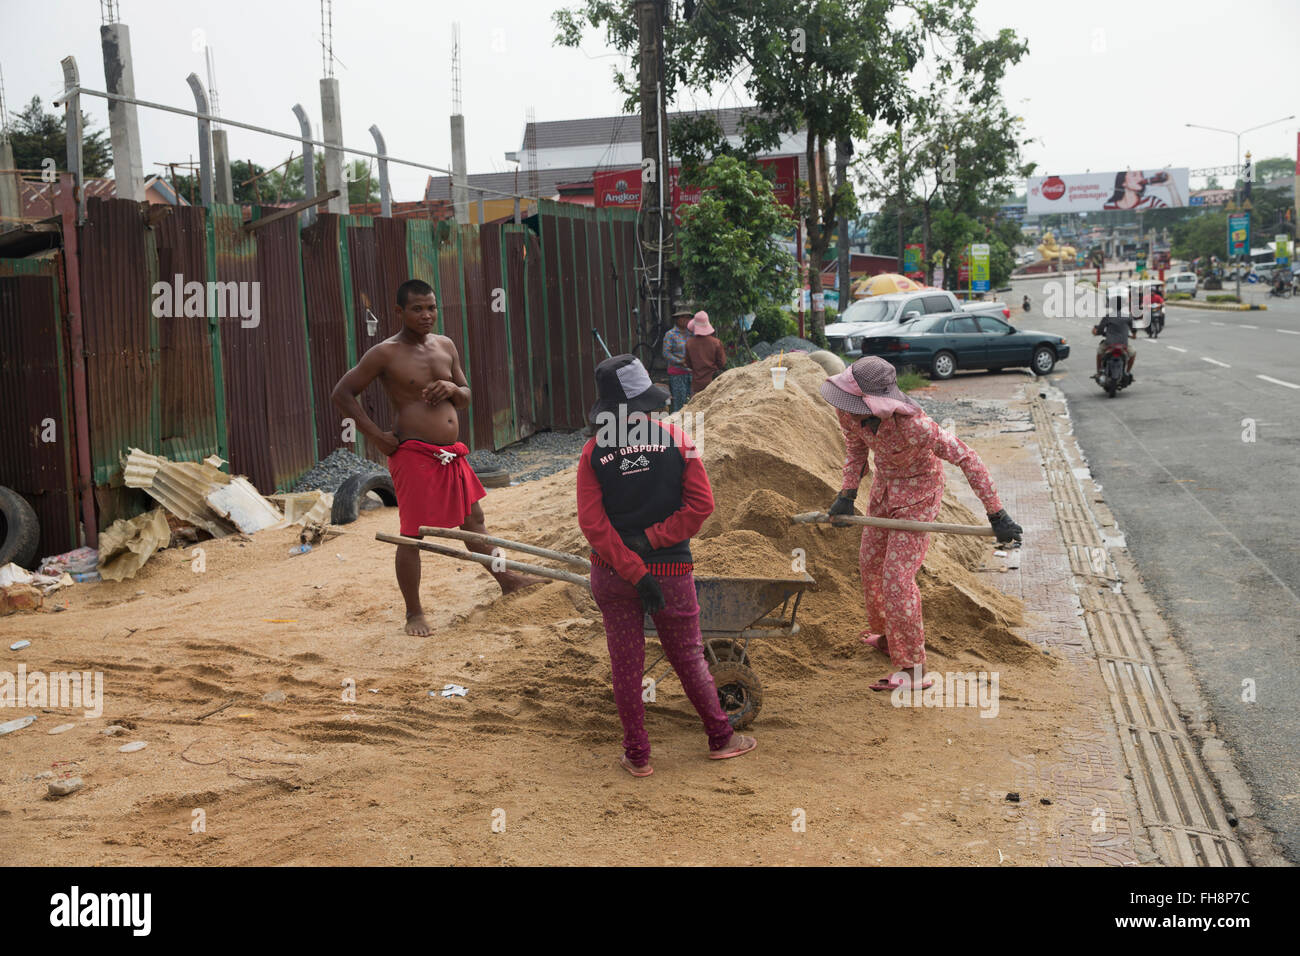 workers on the side of the road in Sihanoukville, Cambodia Stock Photo